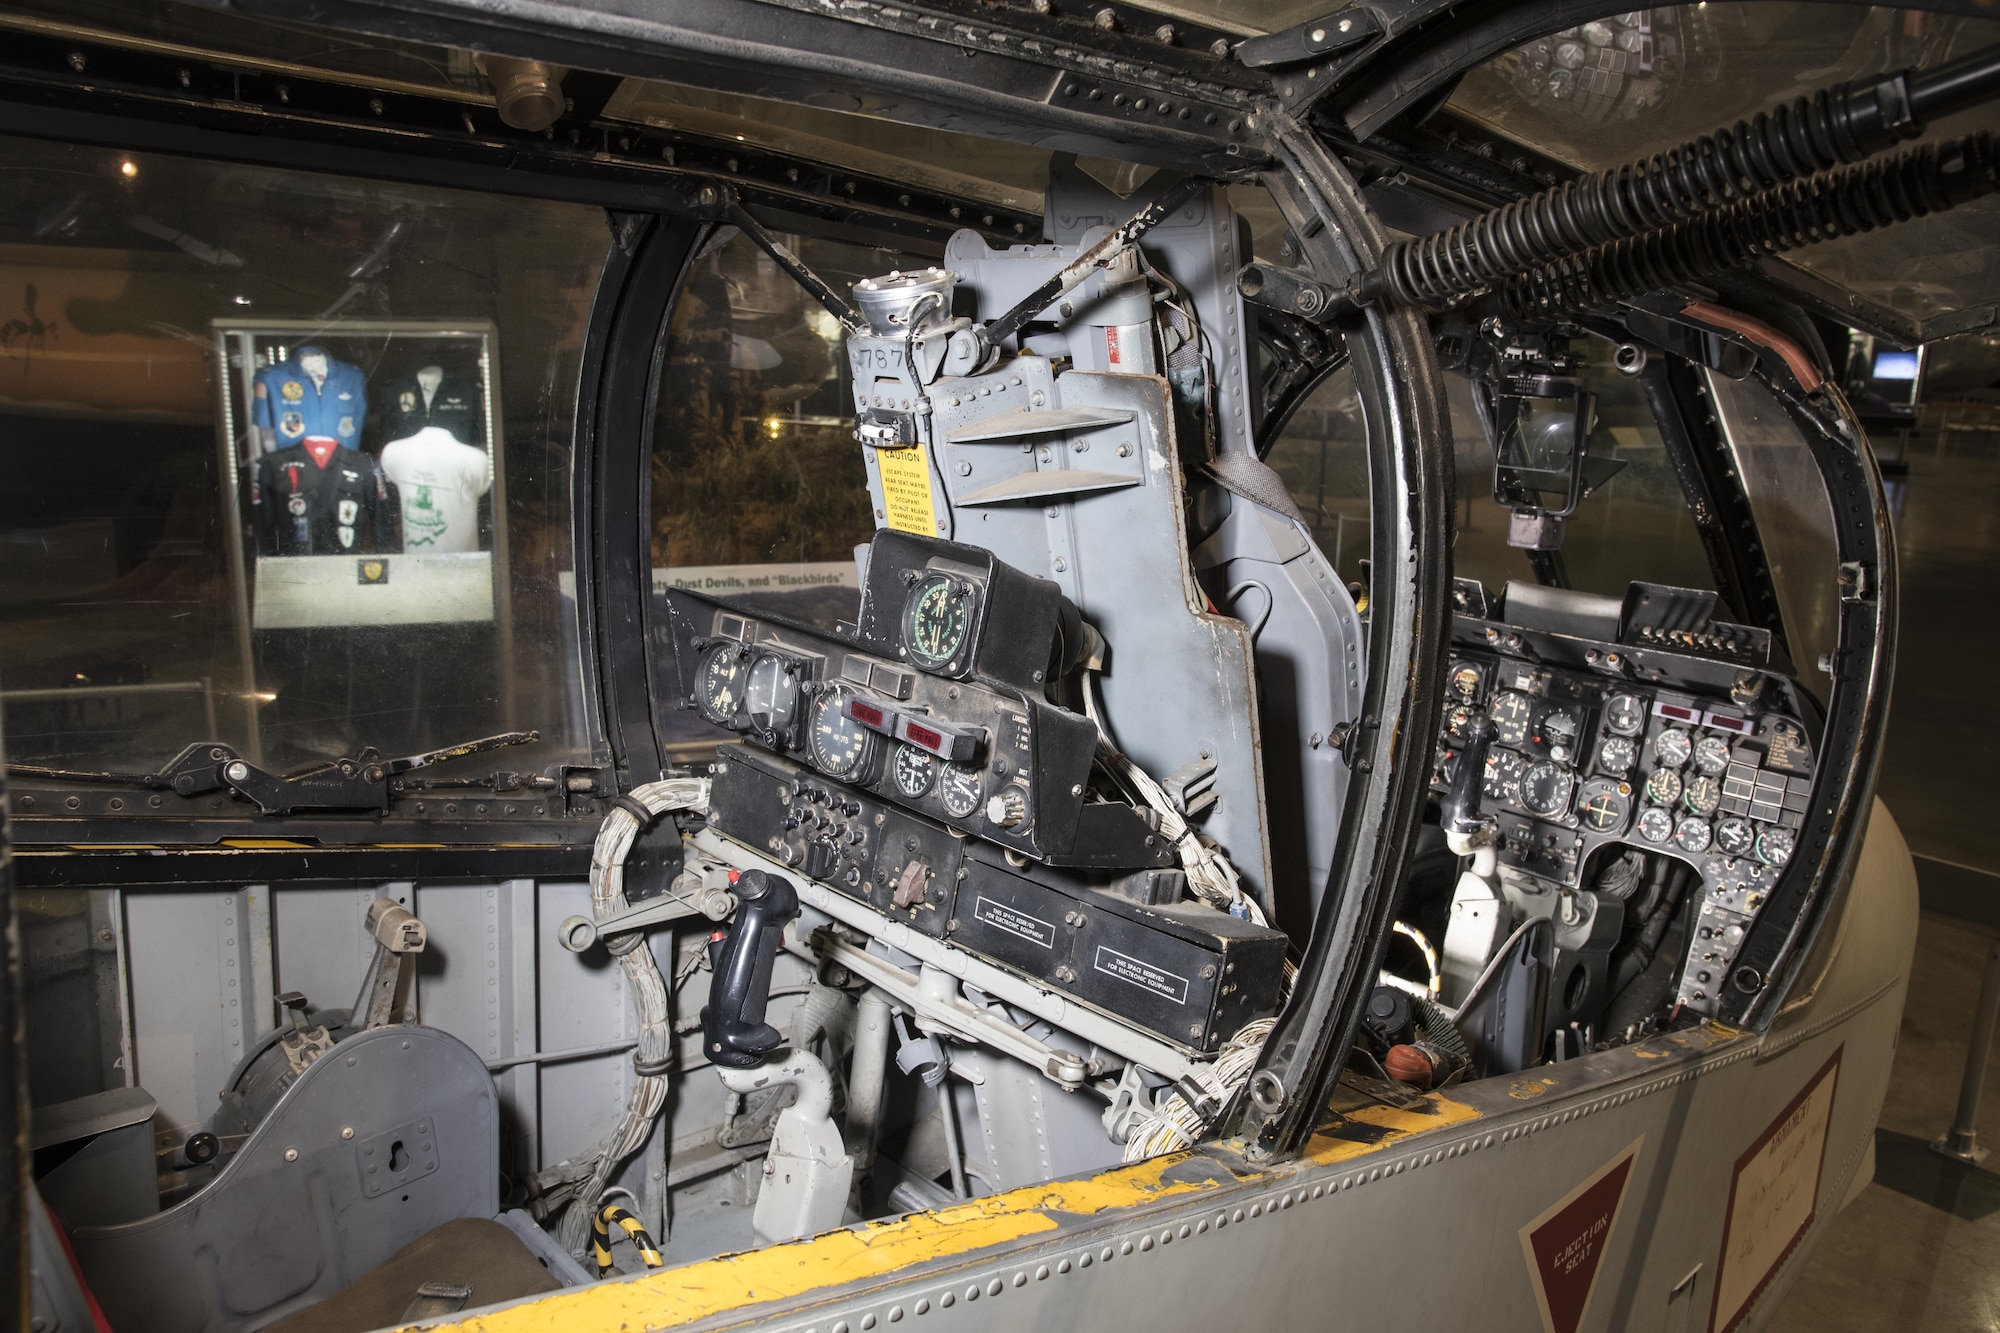 DAYTON, Ohio -- North American Rockwell OV-10A front and rear cockpits in the Southeast Asia War Gallery at the National Museum of the United States Air Force. (U.S. Air Force photo by Ken LaRock)